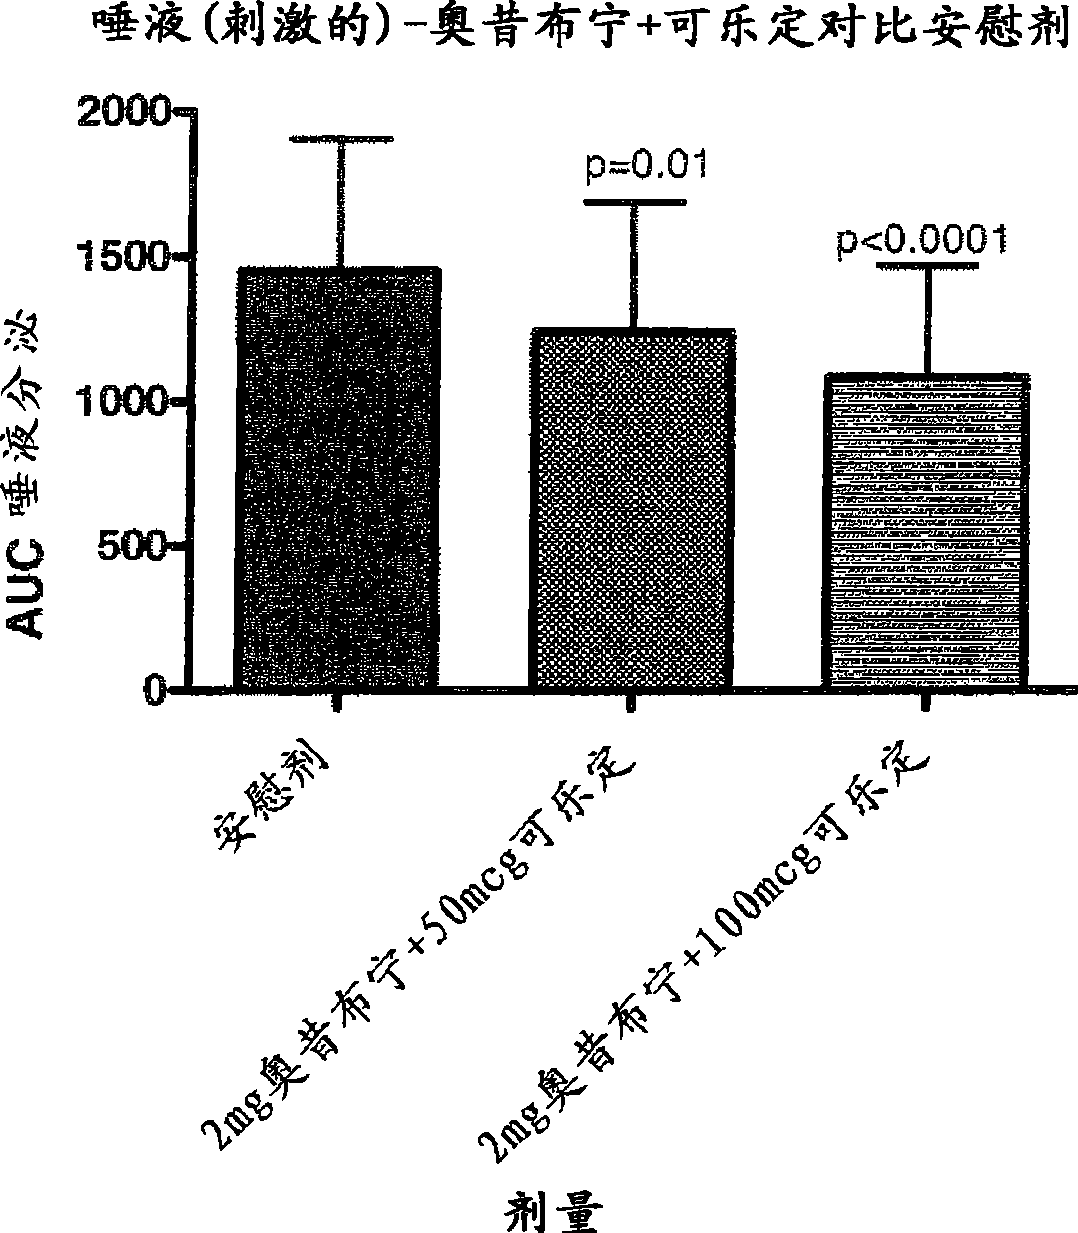 Combination of alpha-2 receptor agonist (clonidin) and an anti-muscarinic agent (oxybutynin) for the treatment of sialorrhoea